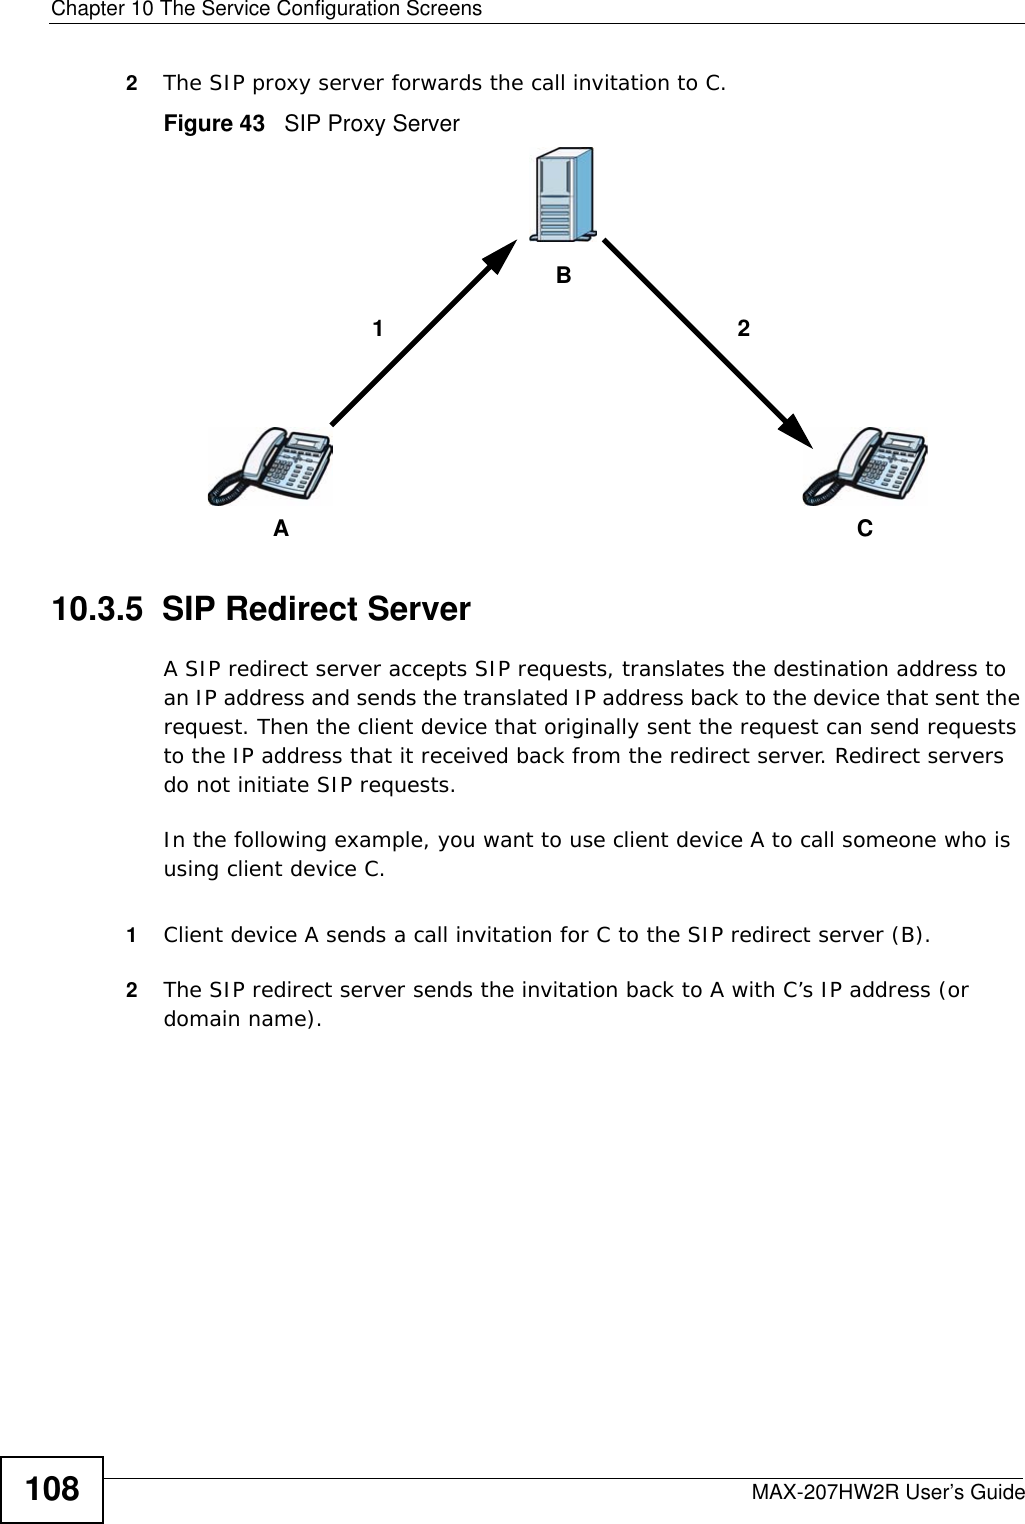 Chapter 10 The Service Configuration ScreensMAX-207HW2R User’s Guide1082The SIP proxy server forwards the call invitation to C.Figure 43   SIP Proxy Server10.3.5  SIP Redirect ServerA SIP redirect server accepts SIP requests, translates the destination address to an IP address and sends the translated IP address back to the device that sent the request. Then the client device that originally sent the request can send requests to the IP address that it received back from the redirect server. Redirect servers do not initiate SIP requests. In the following example, you want to use client device A to call someone who is using client device C. 1Client device A sends a call invitation for C to the SIP redirect server (B).2The SIP redirect server sends the invitation back to A with C’s IP address (or domain name).ACB12